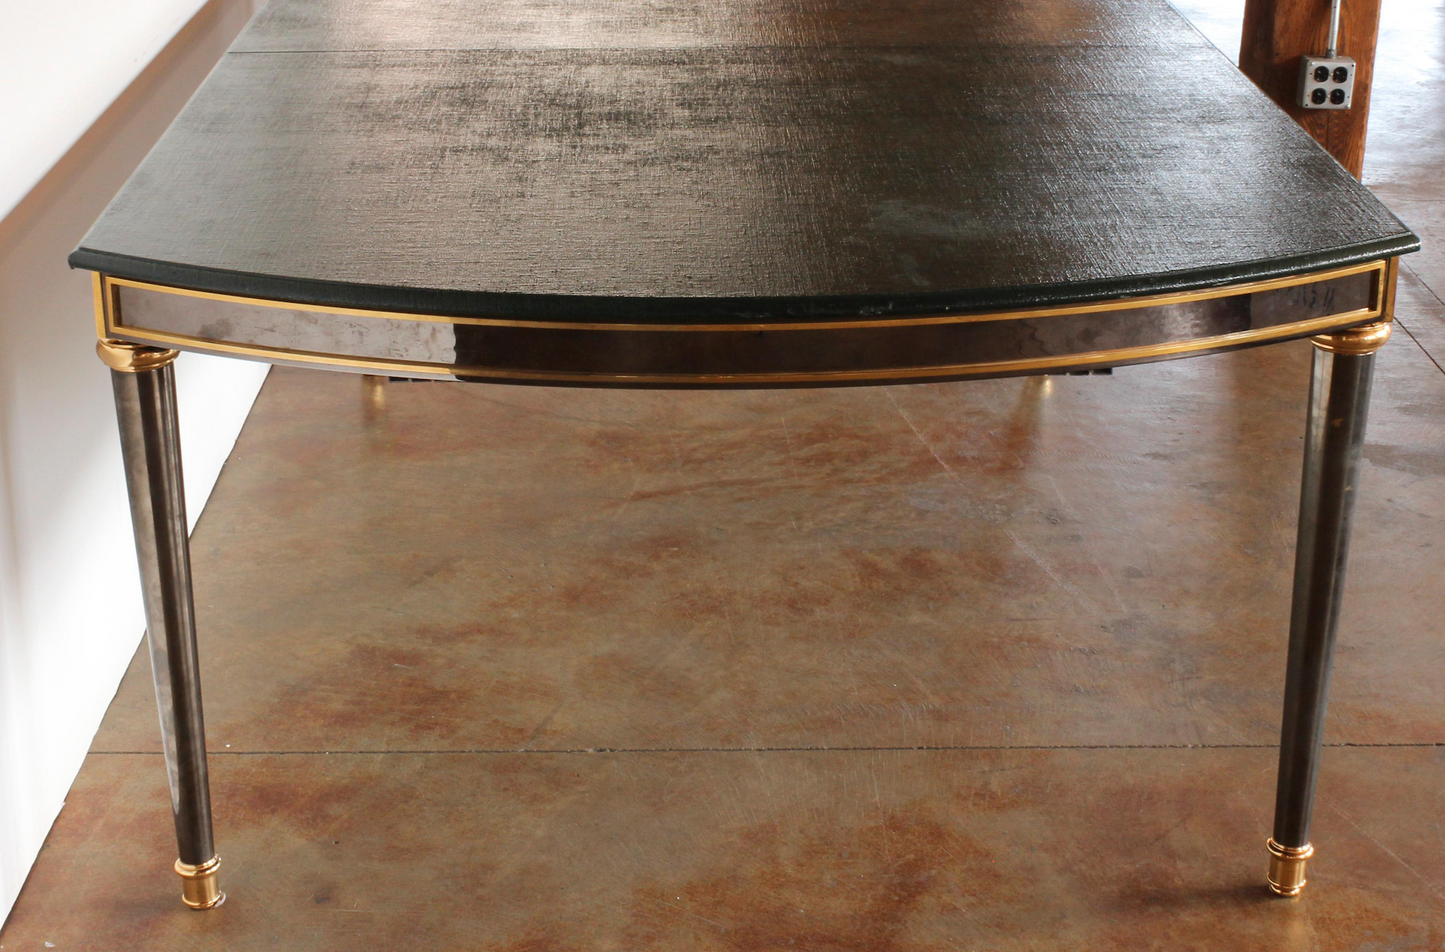 Late 19th/Early 20th Century Neoclassical Style Gilt-Bronze-Mounted Dining Table